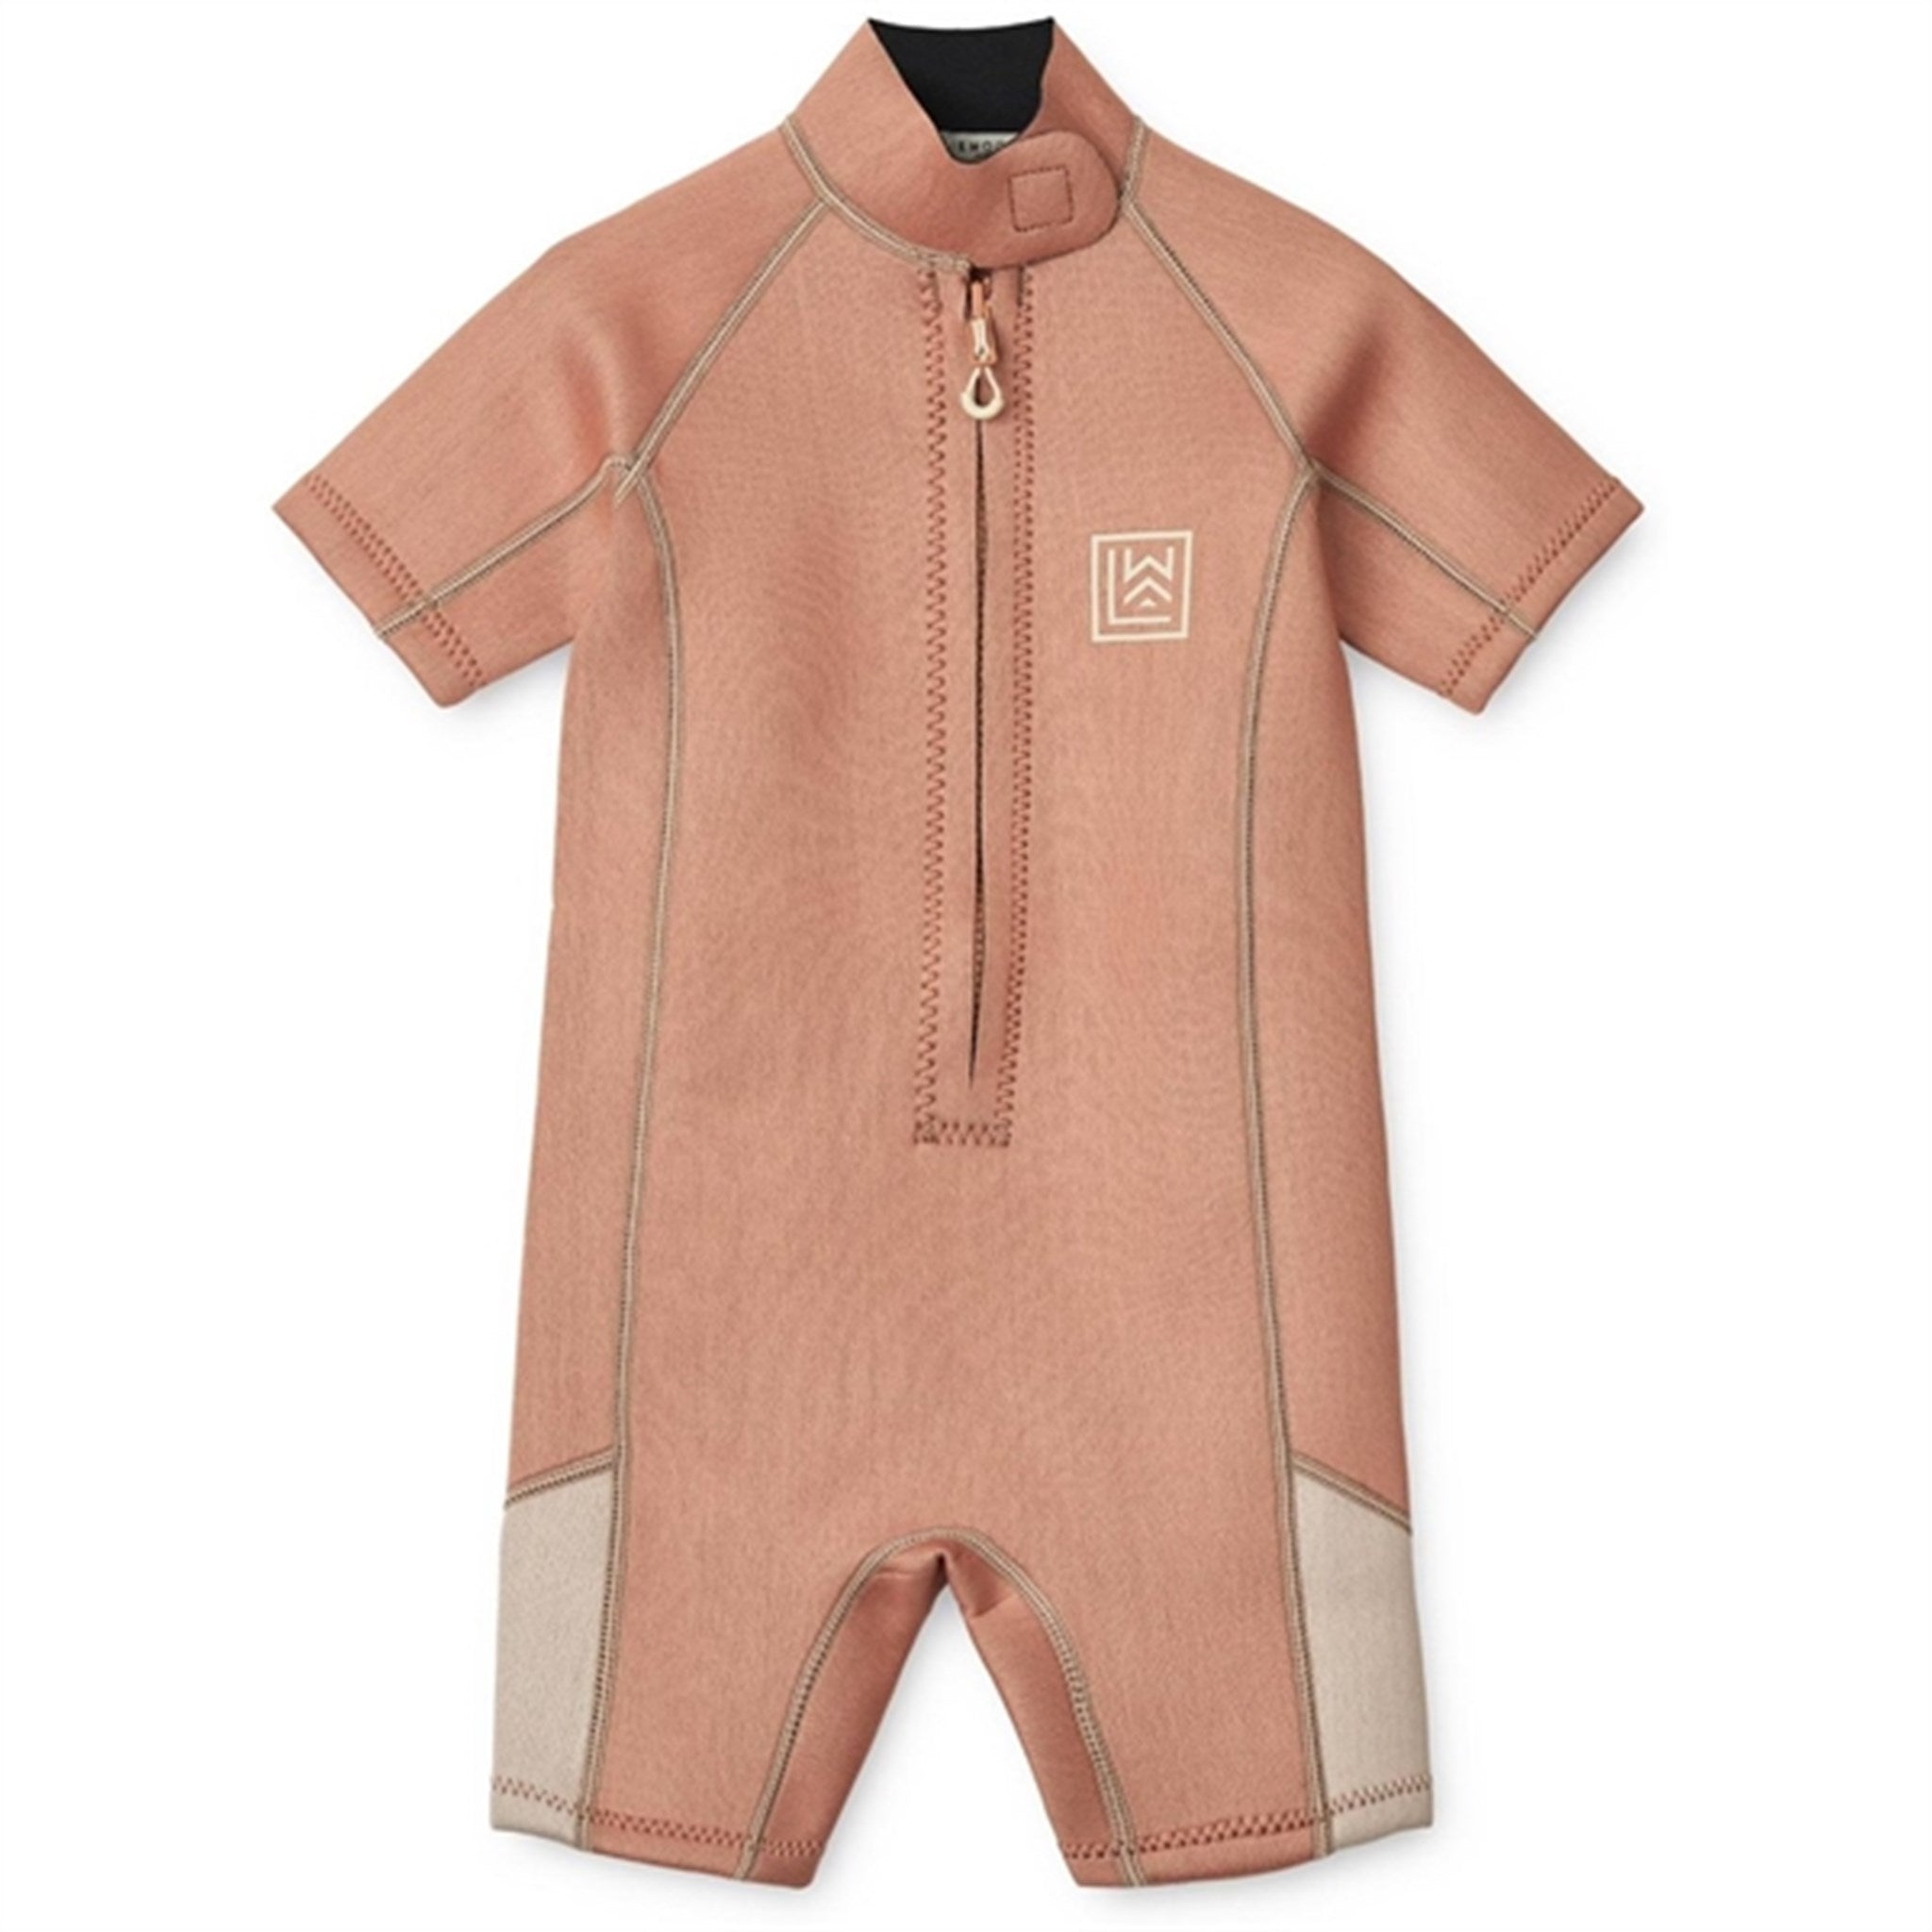 Liewood Alessi Wetsuit Tuscany Rose